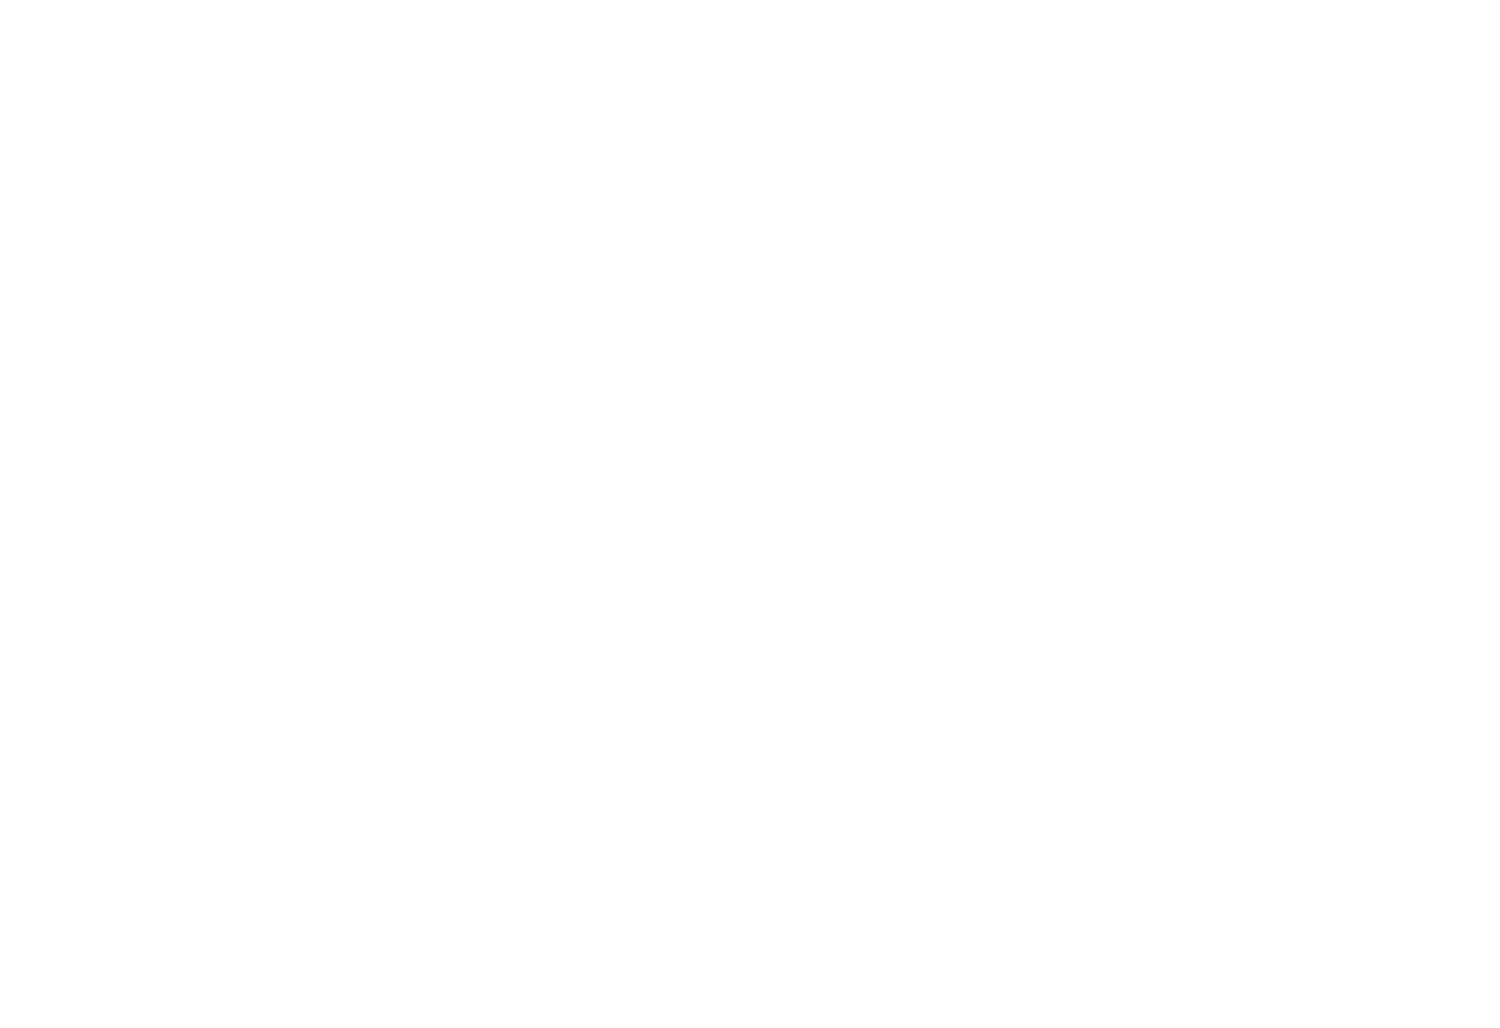 The Lodge Mustards